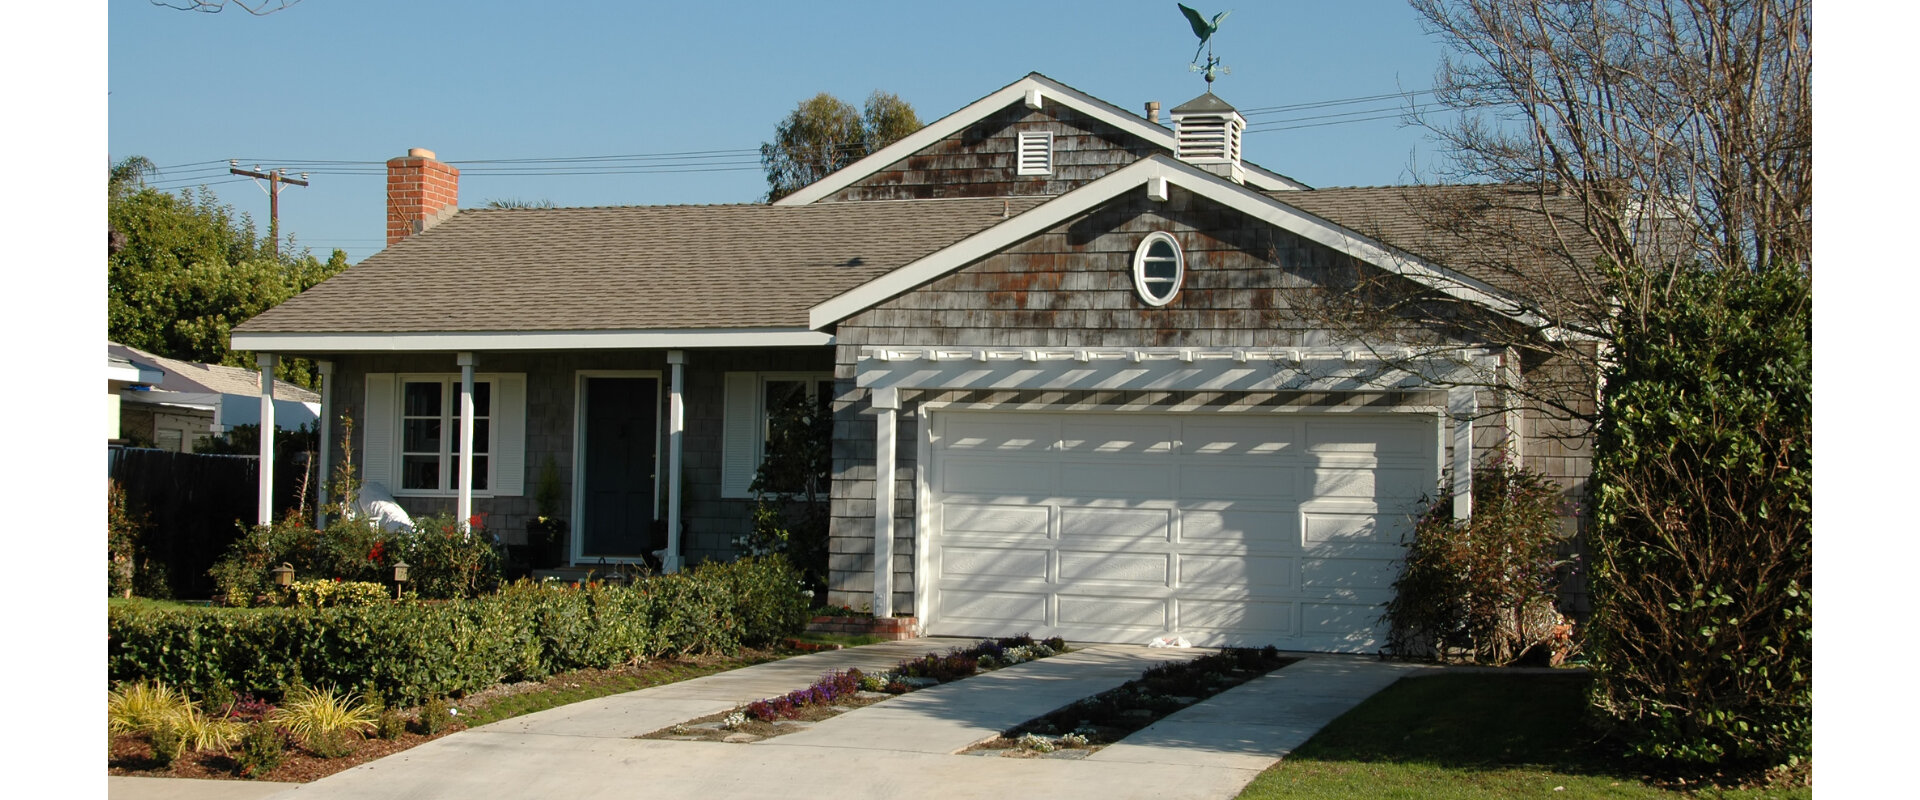 Sell Your House In La Habra, CA